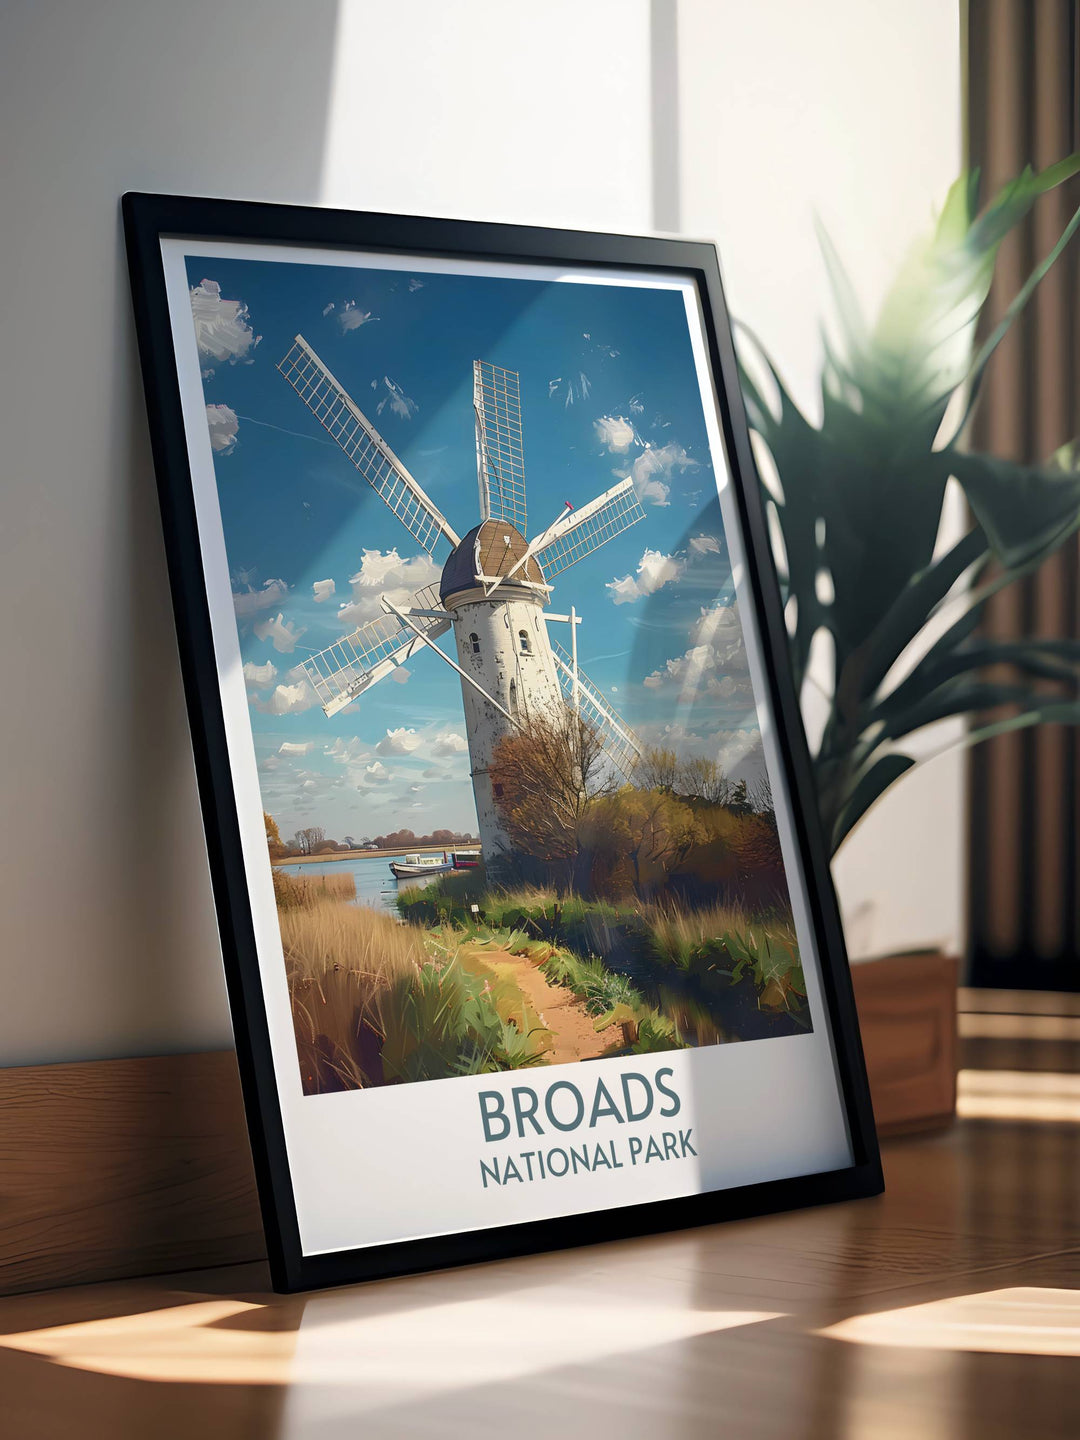 Transform your home with a Thurne Windmill art print. This artwork beautifully captures the tranquil scenes of the Norfolk Broads, offering a serene and picturesque view that complements any decor style.